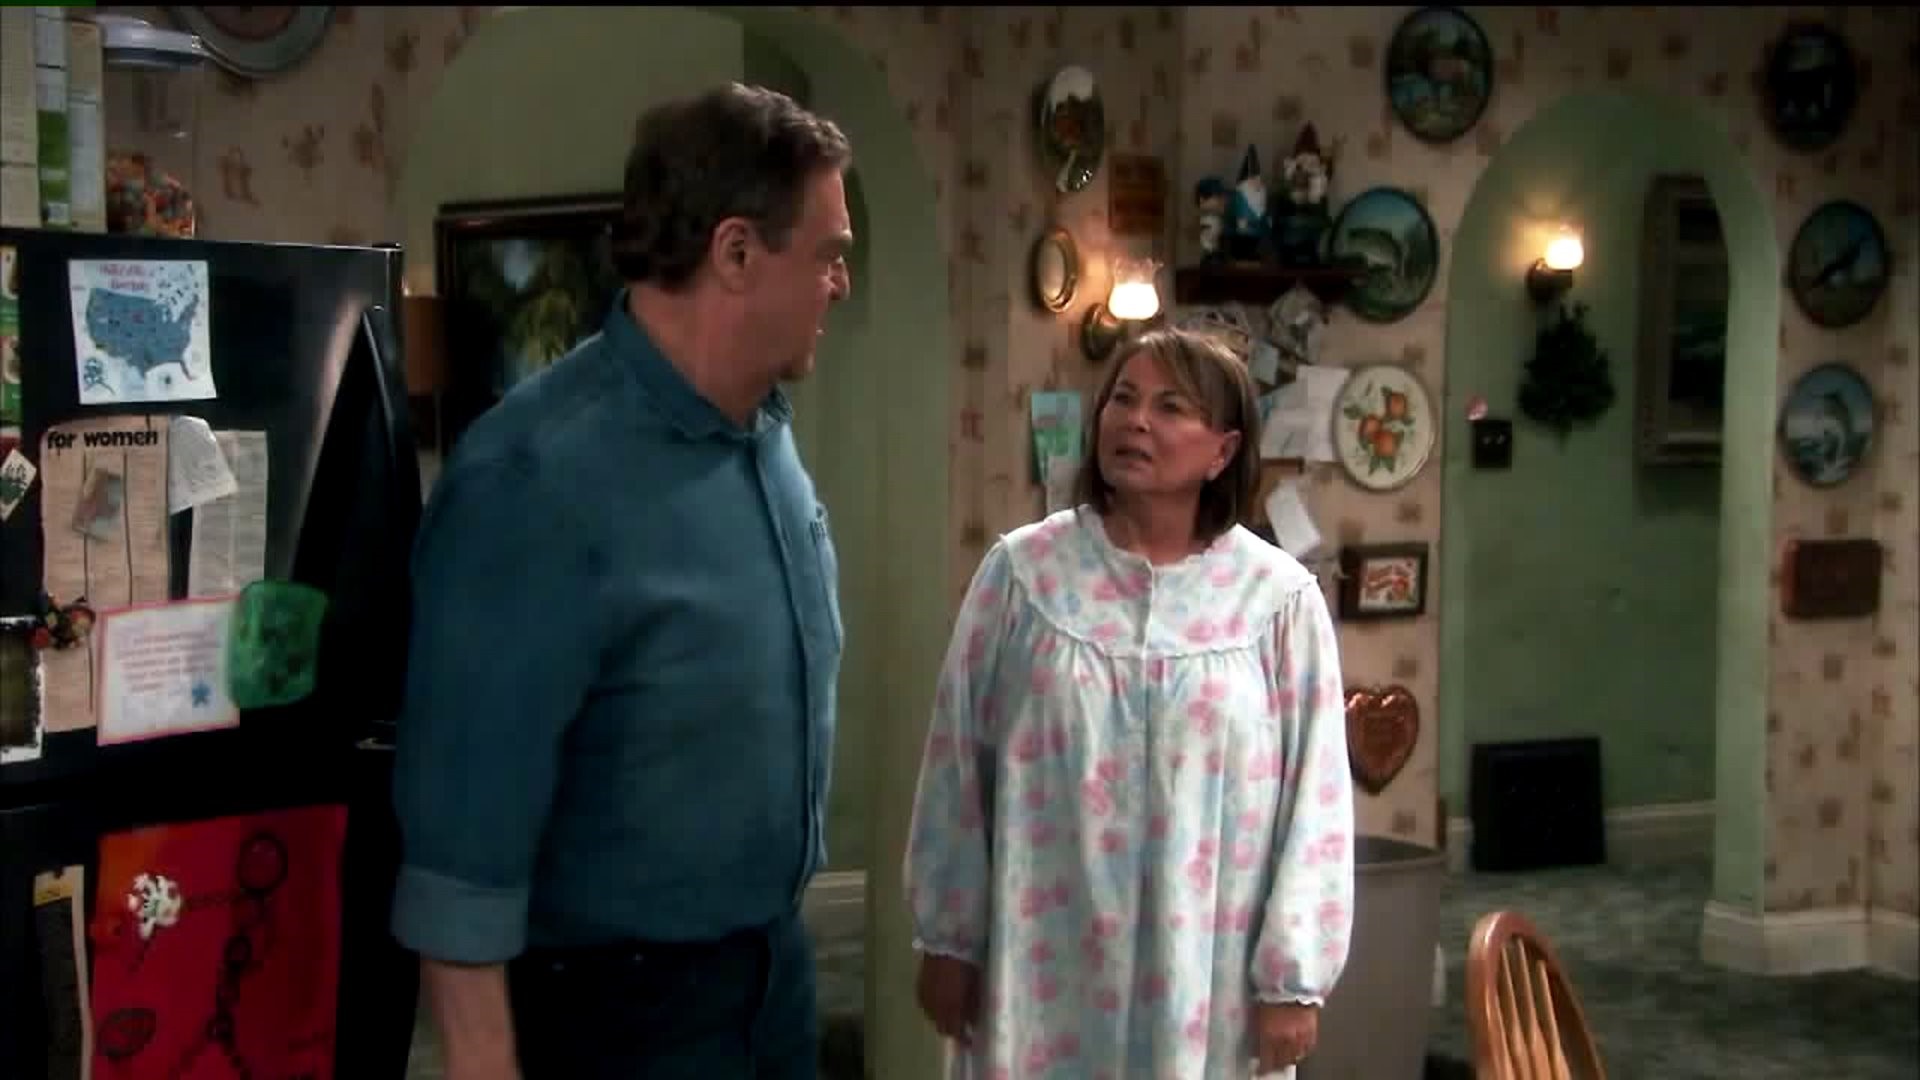 'She shouldn't be saying those types of things' - Fans Stunned by 'Roseanne' Cancellation